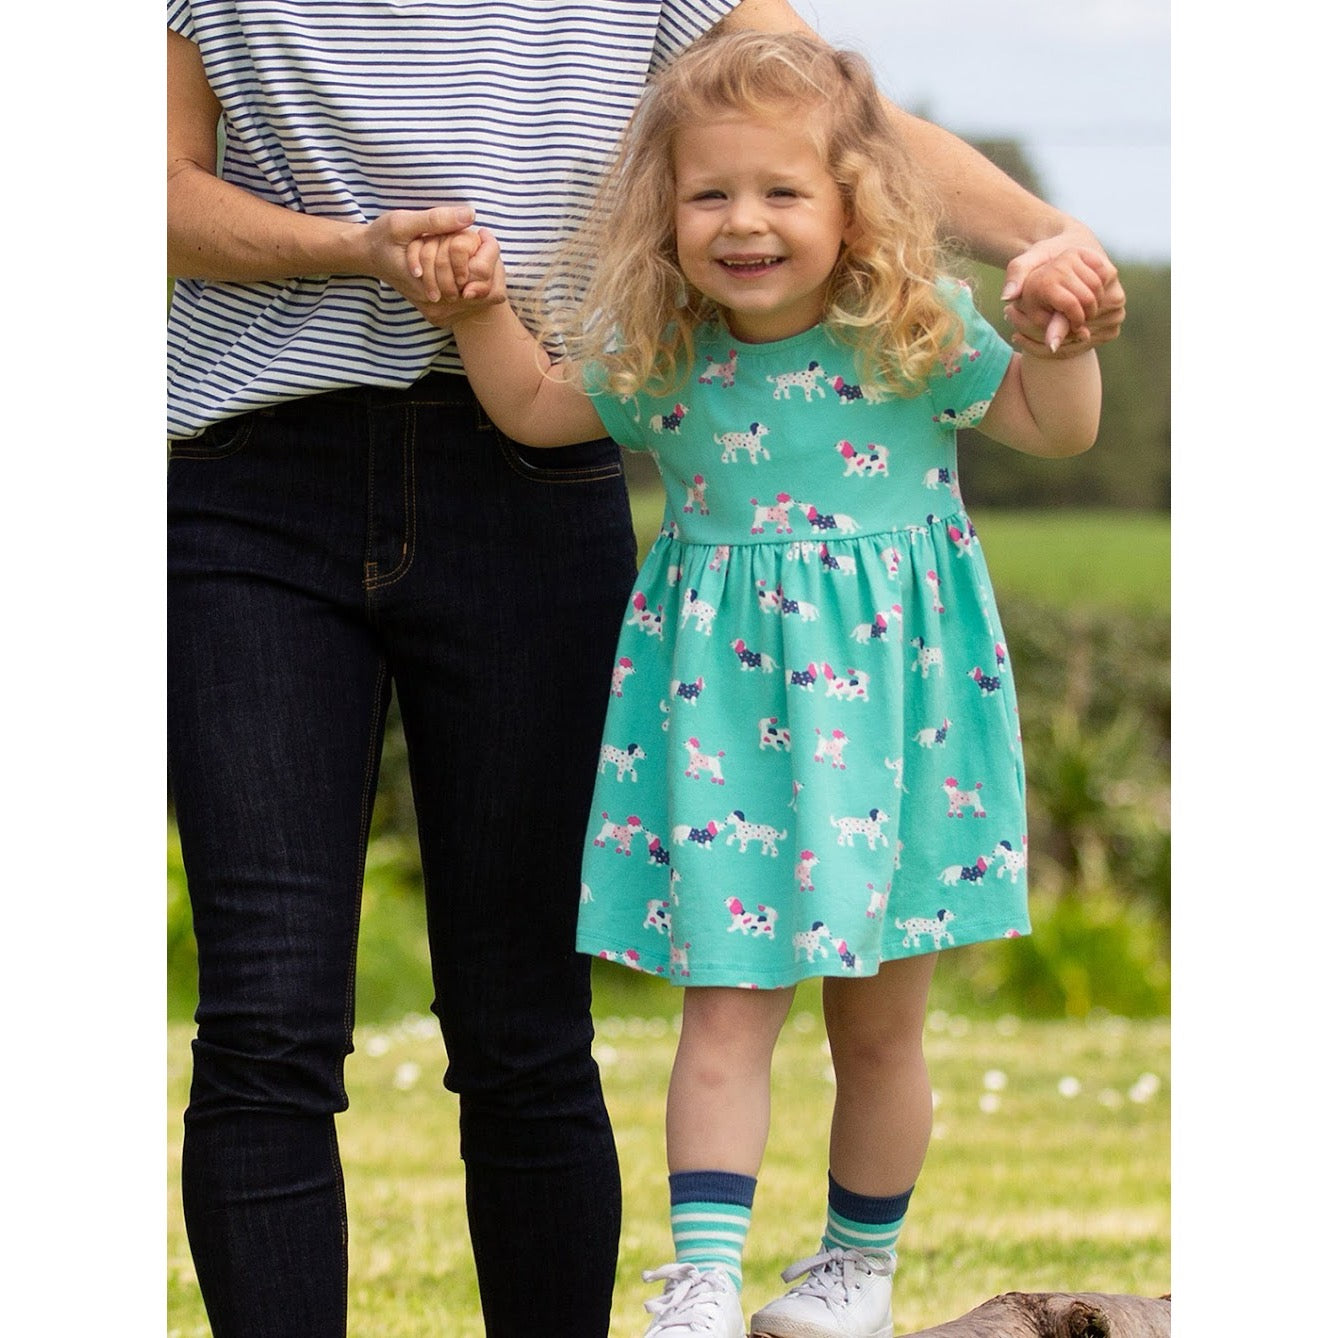 Kite Flora And Friends Infant Dress 41-9682 Clothing 3-6M / Green,6-9M / Green,9-12M / Green,12-18M / Green,18-24M/2Y / Green,3YRS / Green,4YRS / Green,5YRS / Green